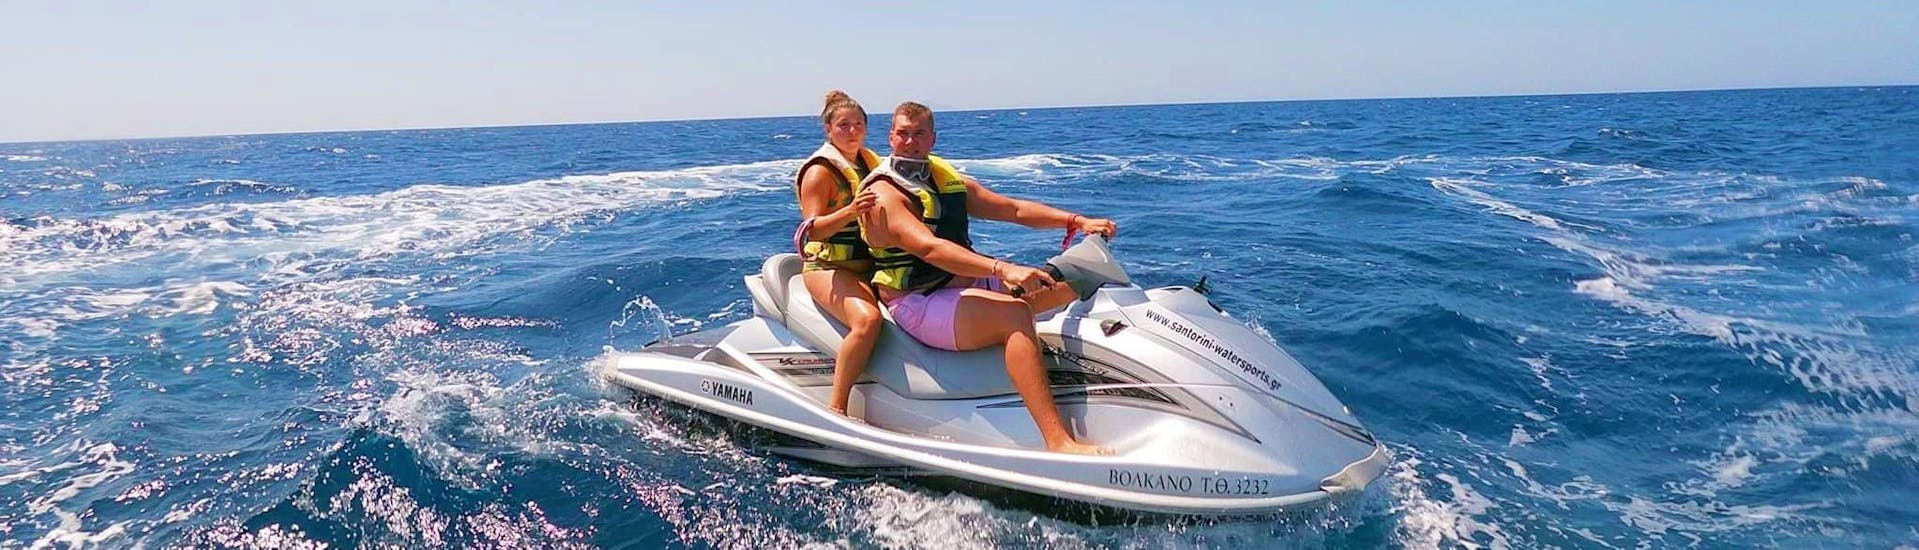 During the Jet Ski Safari to the Volcano & Hot Springs of Santorini with Kamari Beach Watersports Santorini, two participants are riding a Jet Ski across the blue water of the Aegean Sea.